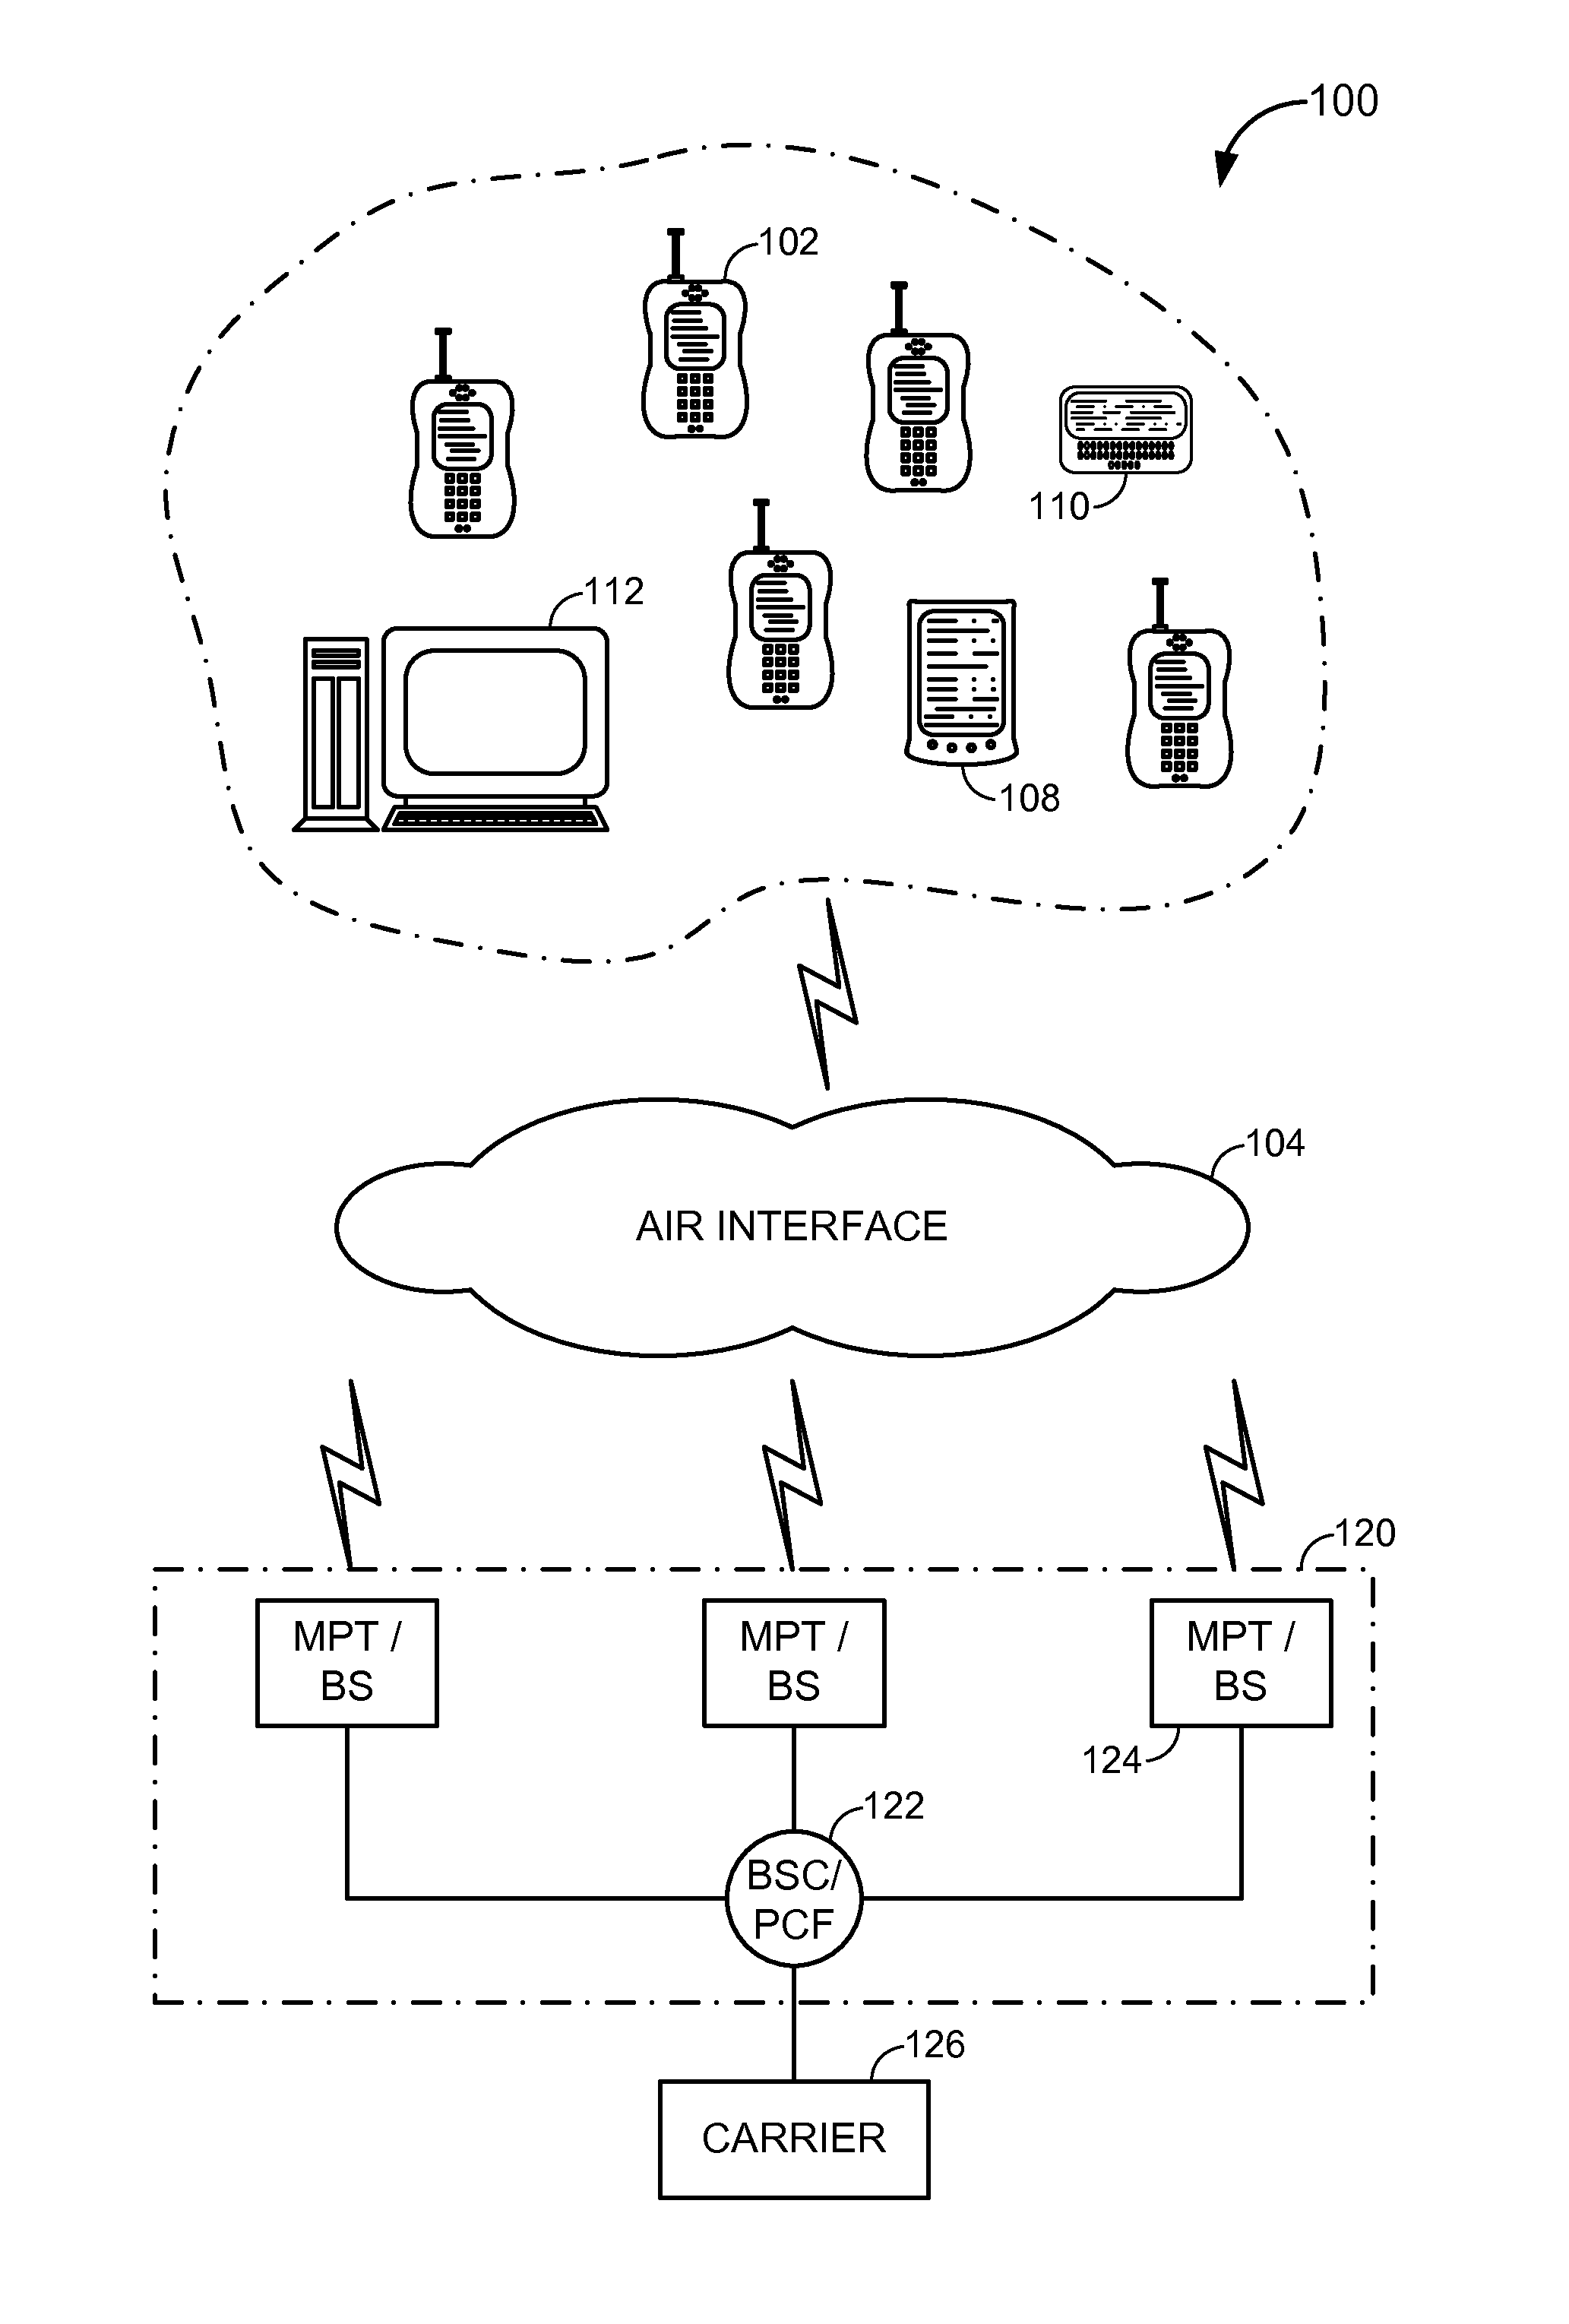 Group communication sessions in a wireless communication system